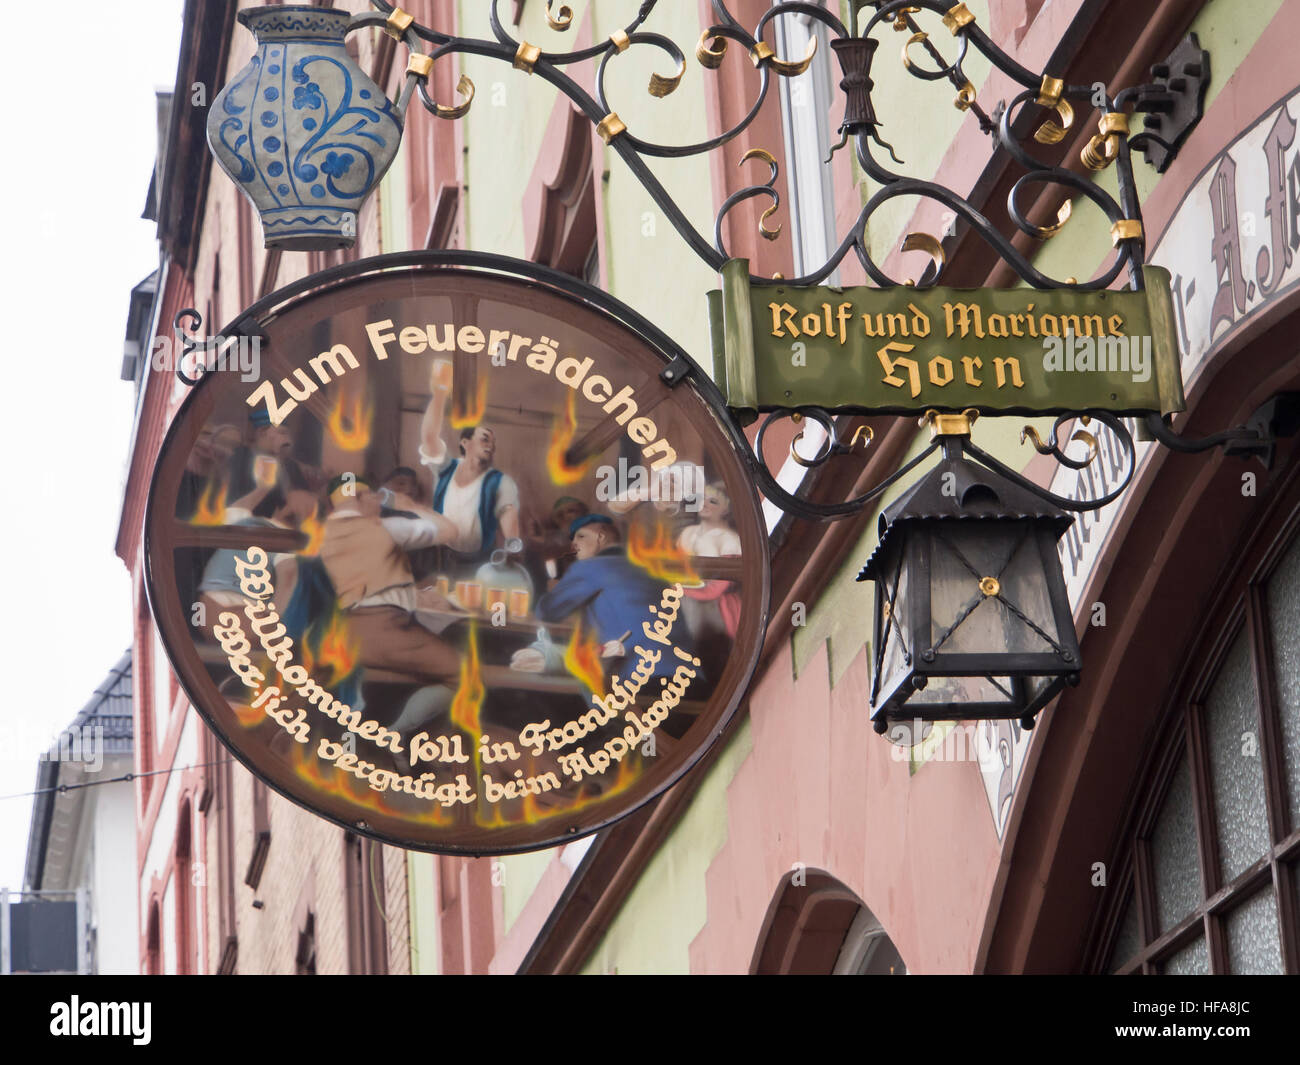 Apfelwein, hard cider or apple wine, a regional specialty in Hesse Germany served in cozy inns all over Frankfurt am Main Stock Photo